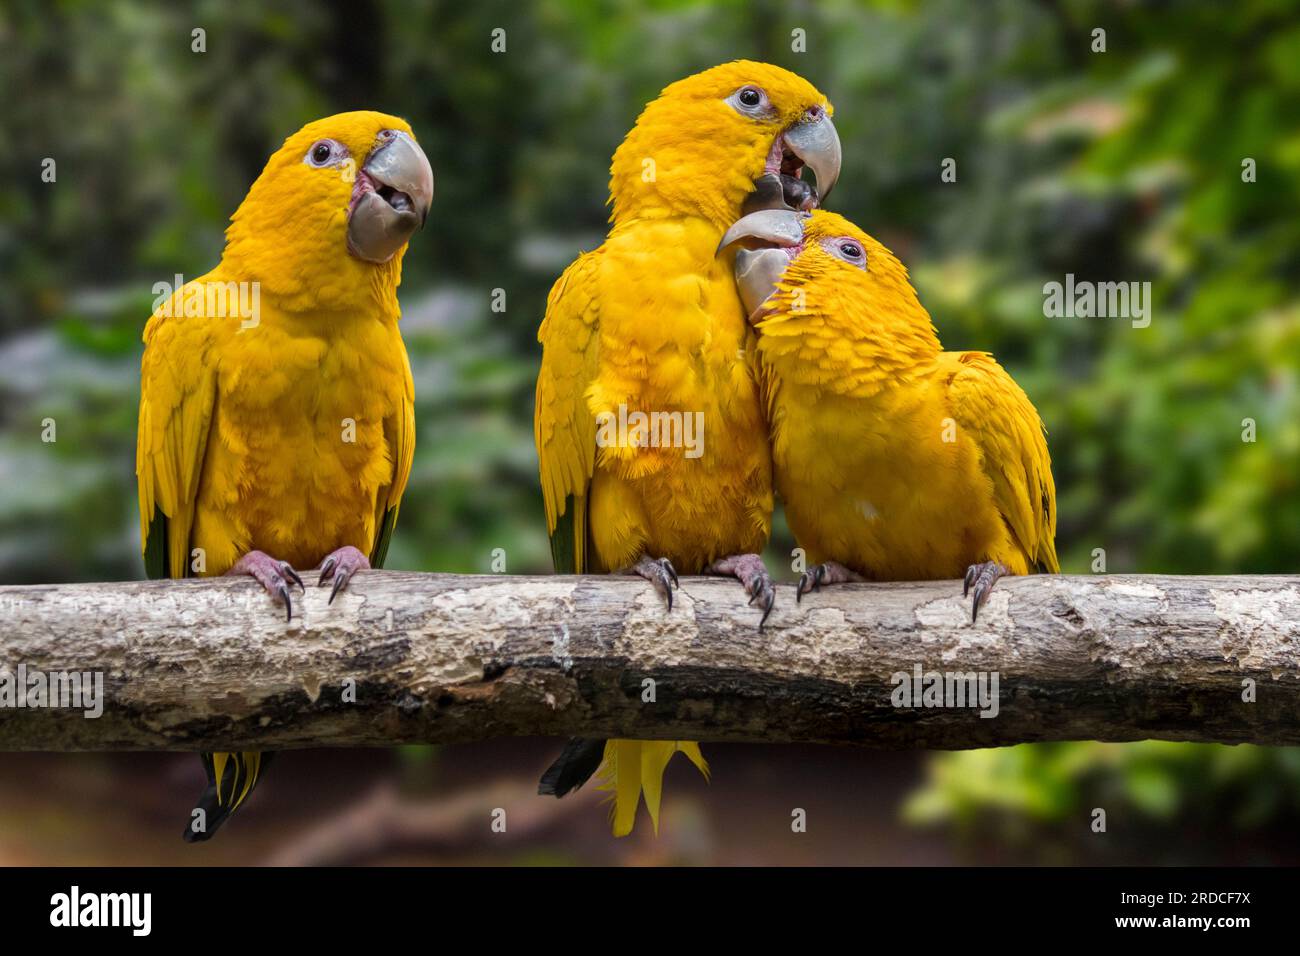 Three golden parakeets / golden conures (Guaruba guarouba) perched in tree, Neotropical parrot native to the Amazon Basin of interior northern Brazil Stock Photo